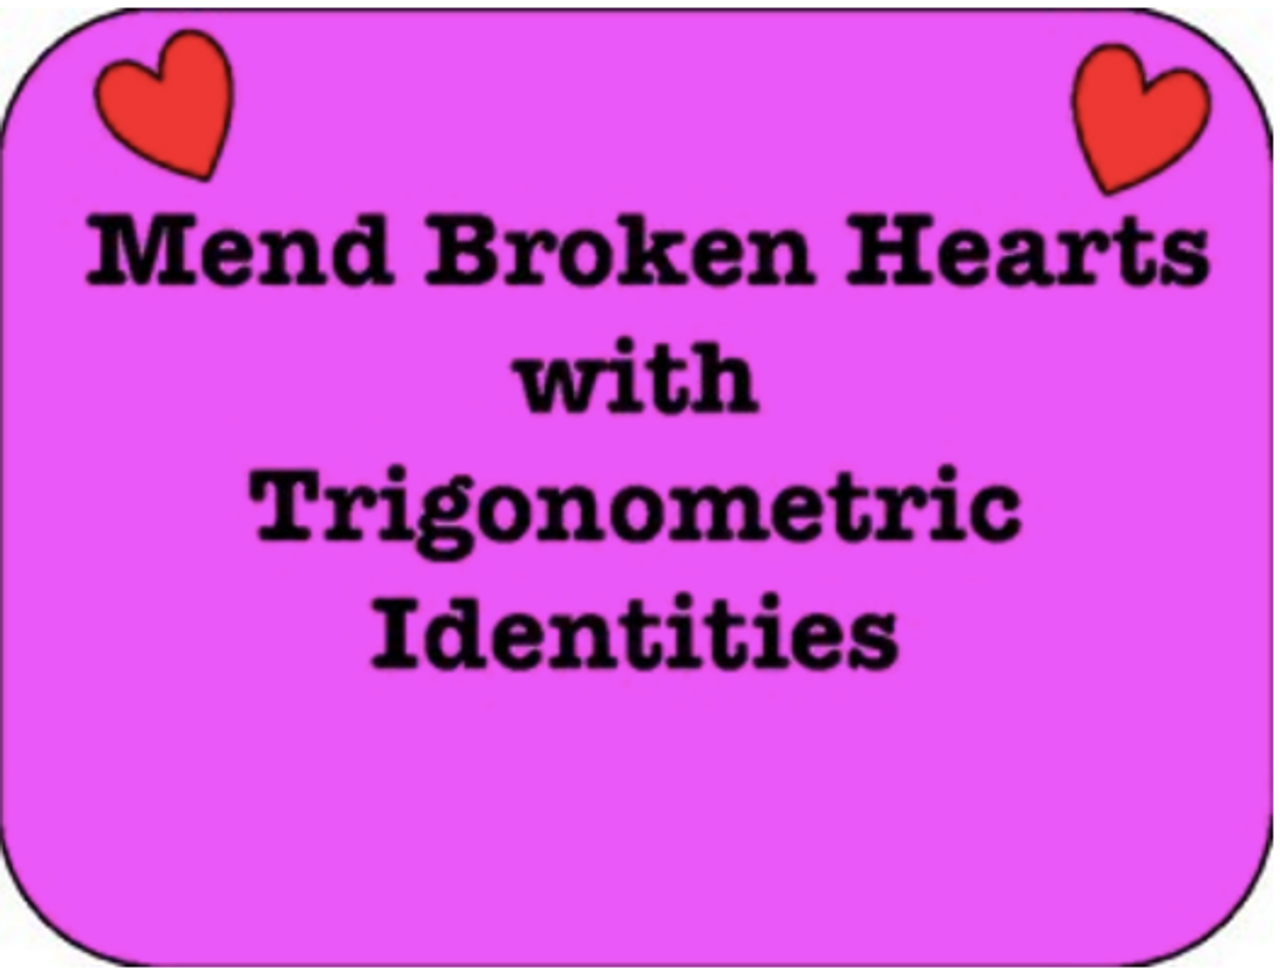 Mend Broken Hearts with Trig. Identities